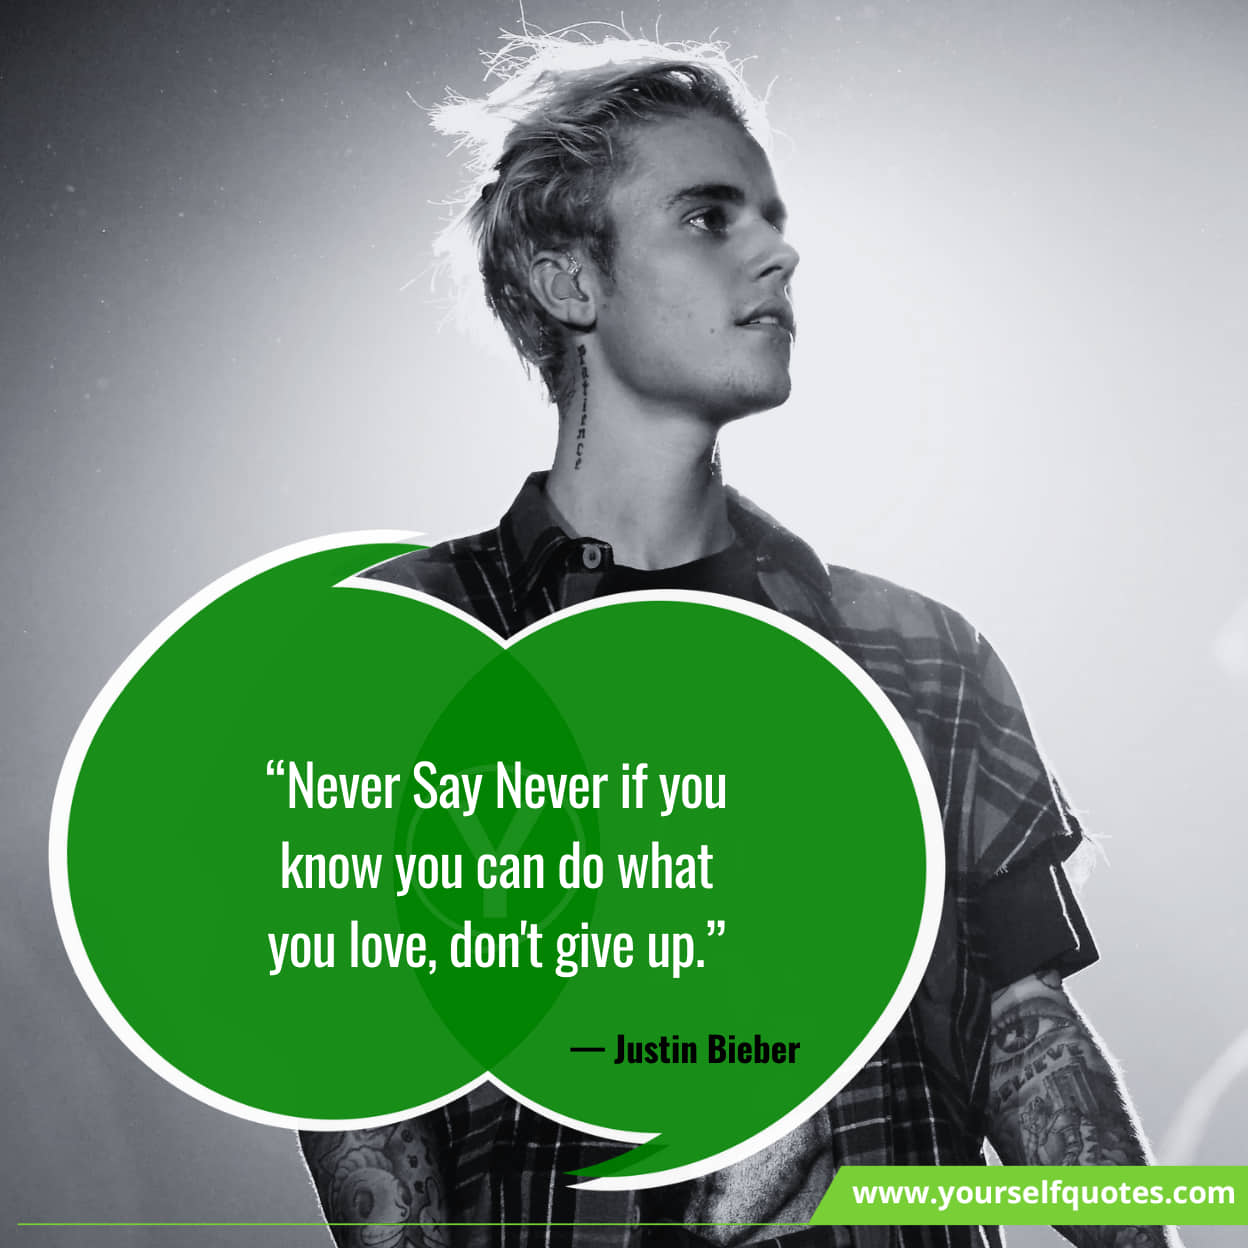 Latest Justin Bieber Quotes